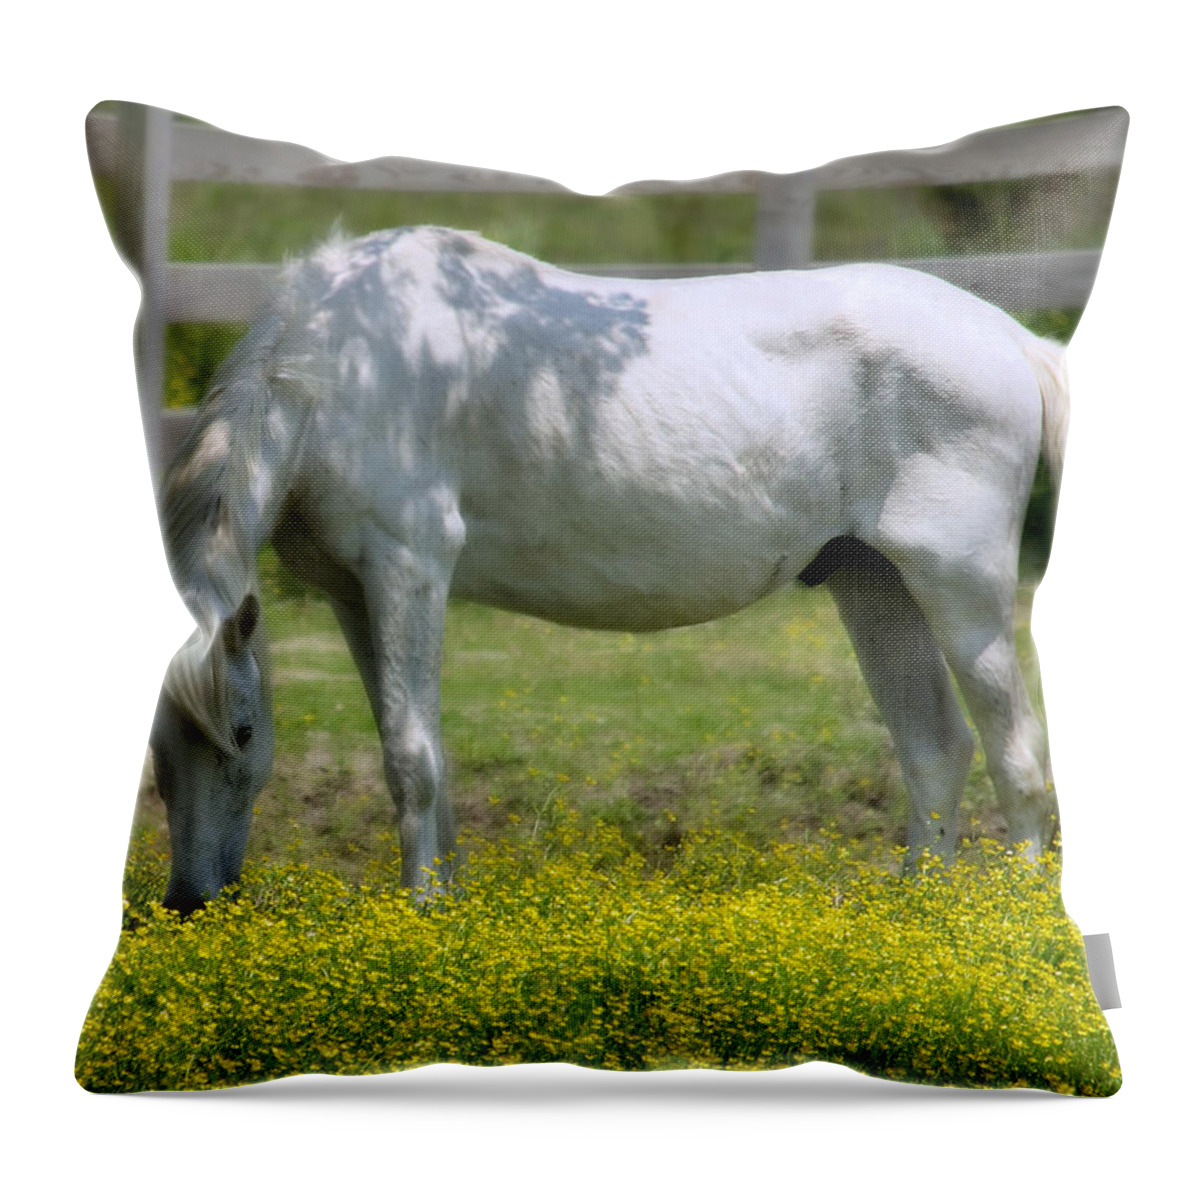 Misty Pony Throw Pillow featuring the photograph Dreamy Pony by Mary Almond